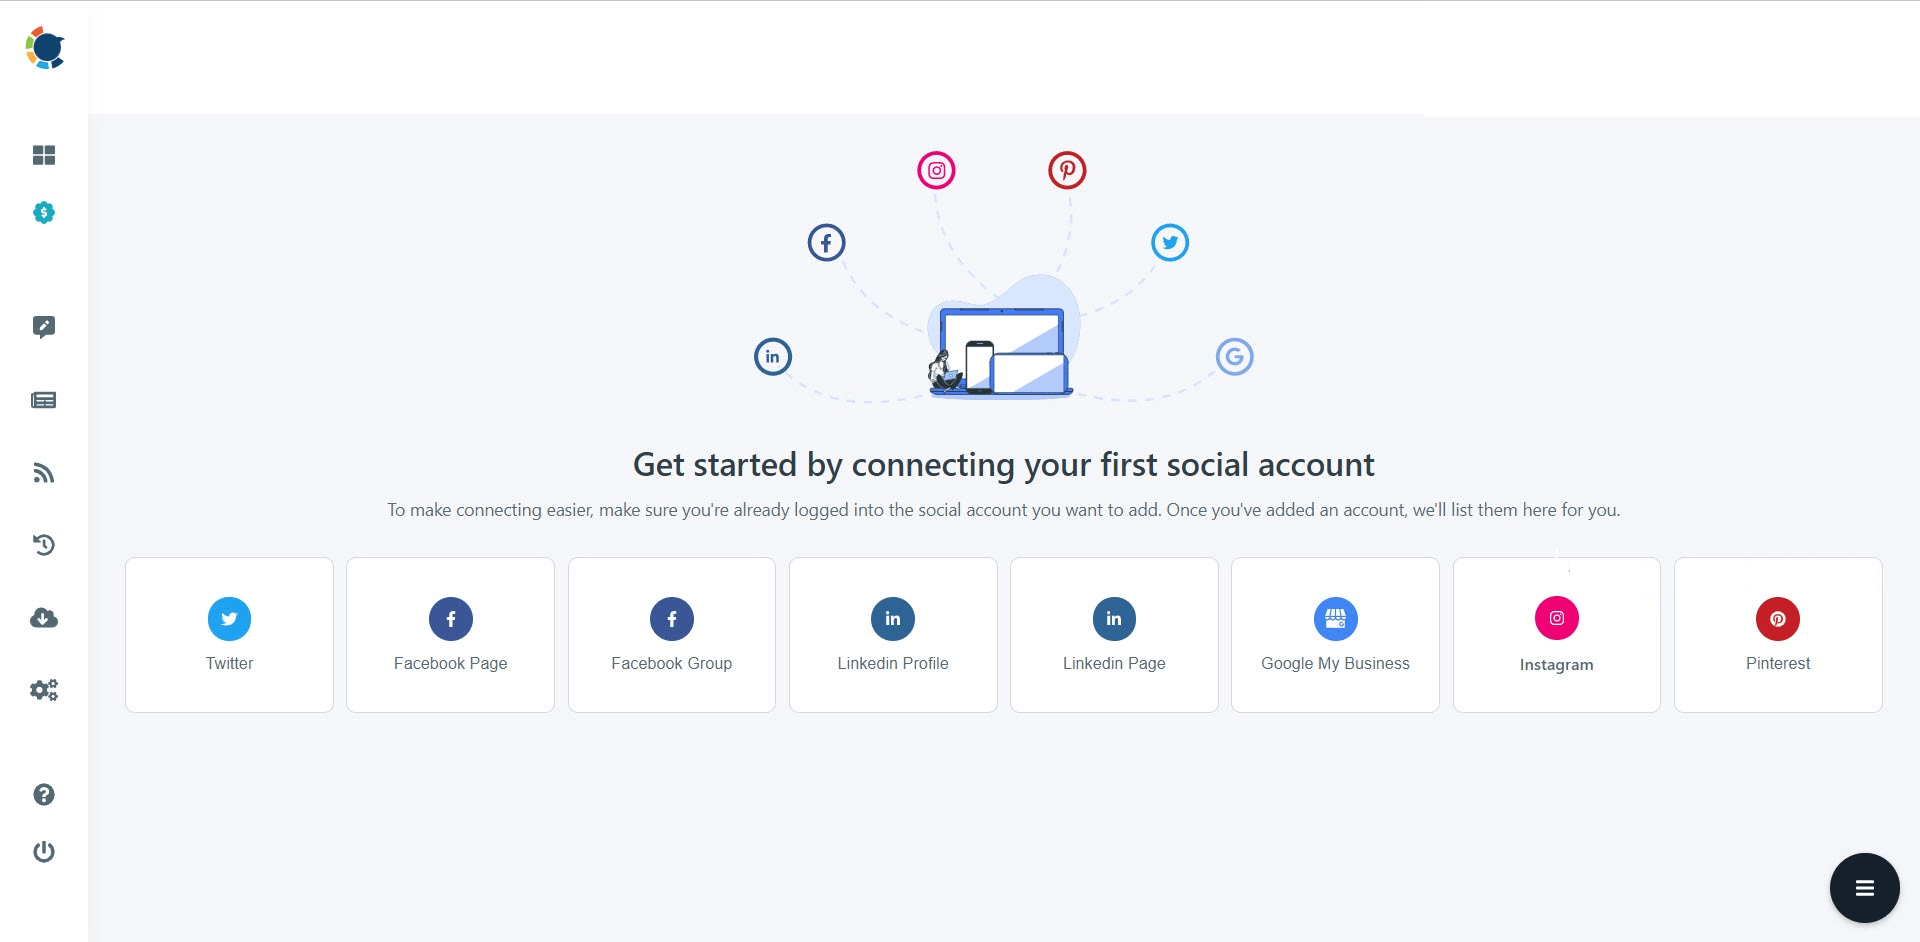 Get started by connection your first social account.